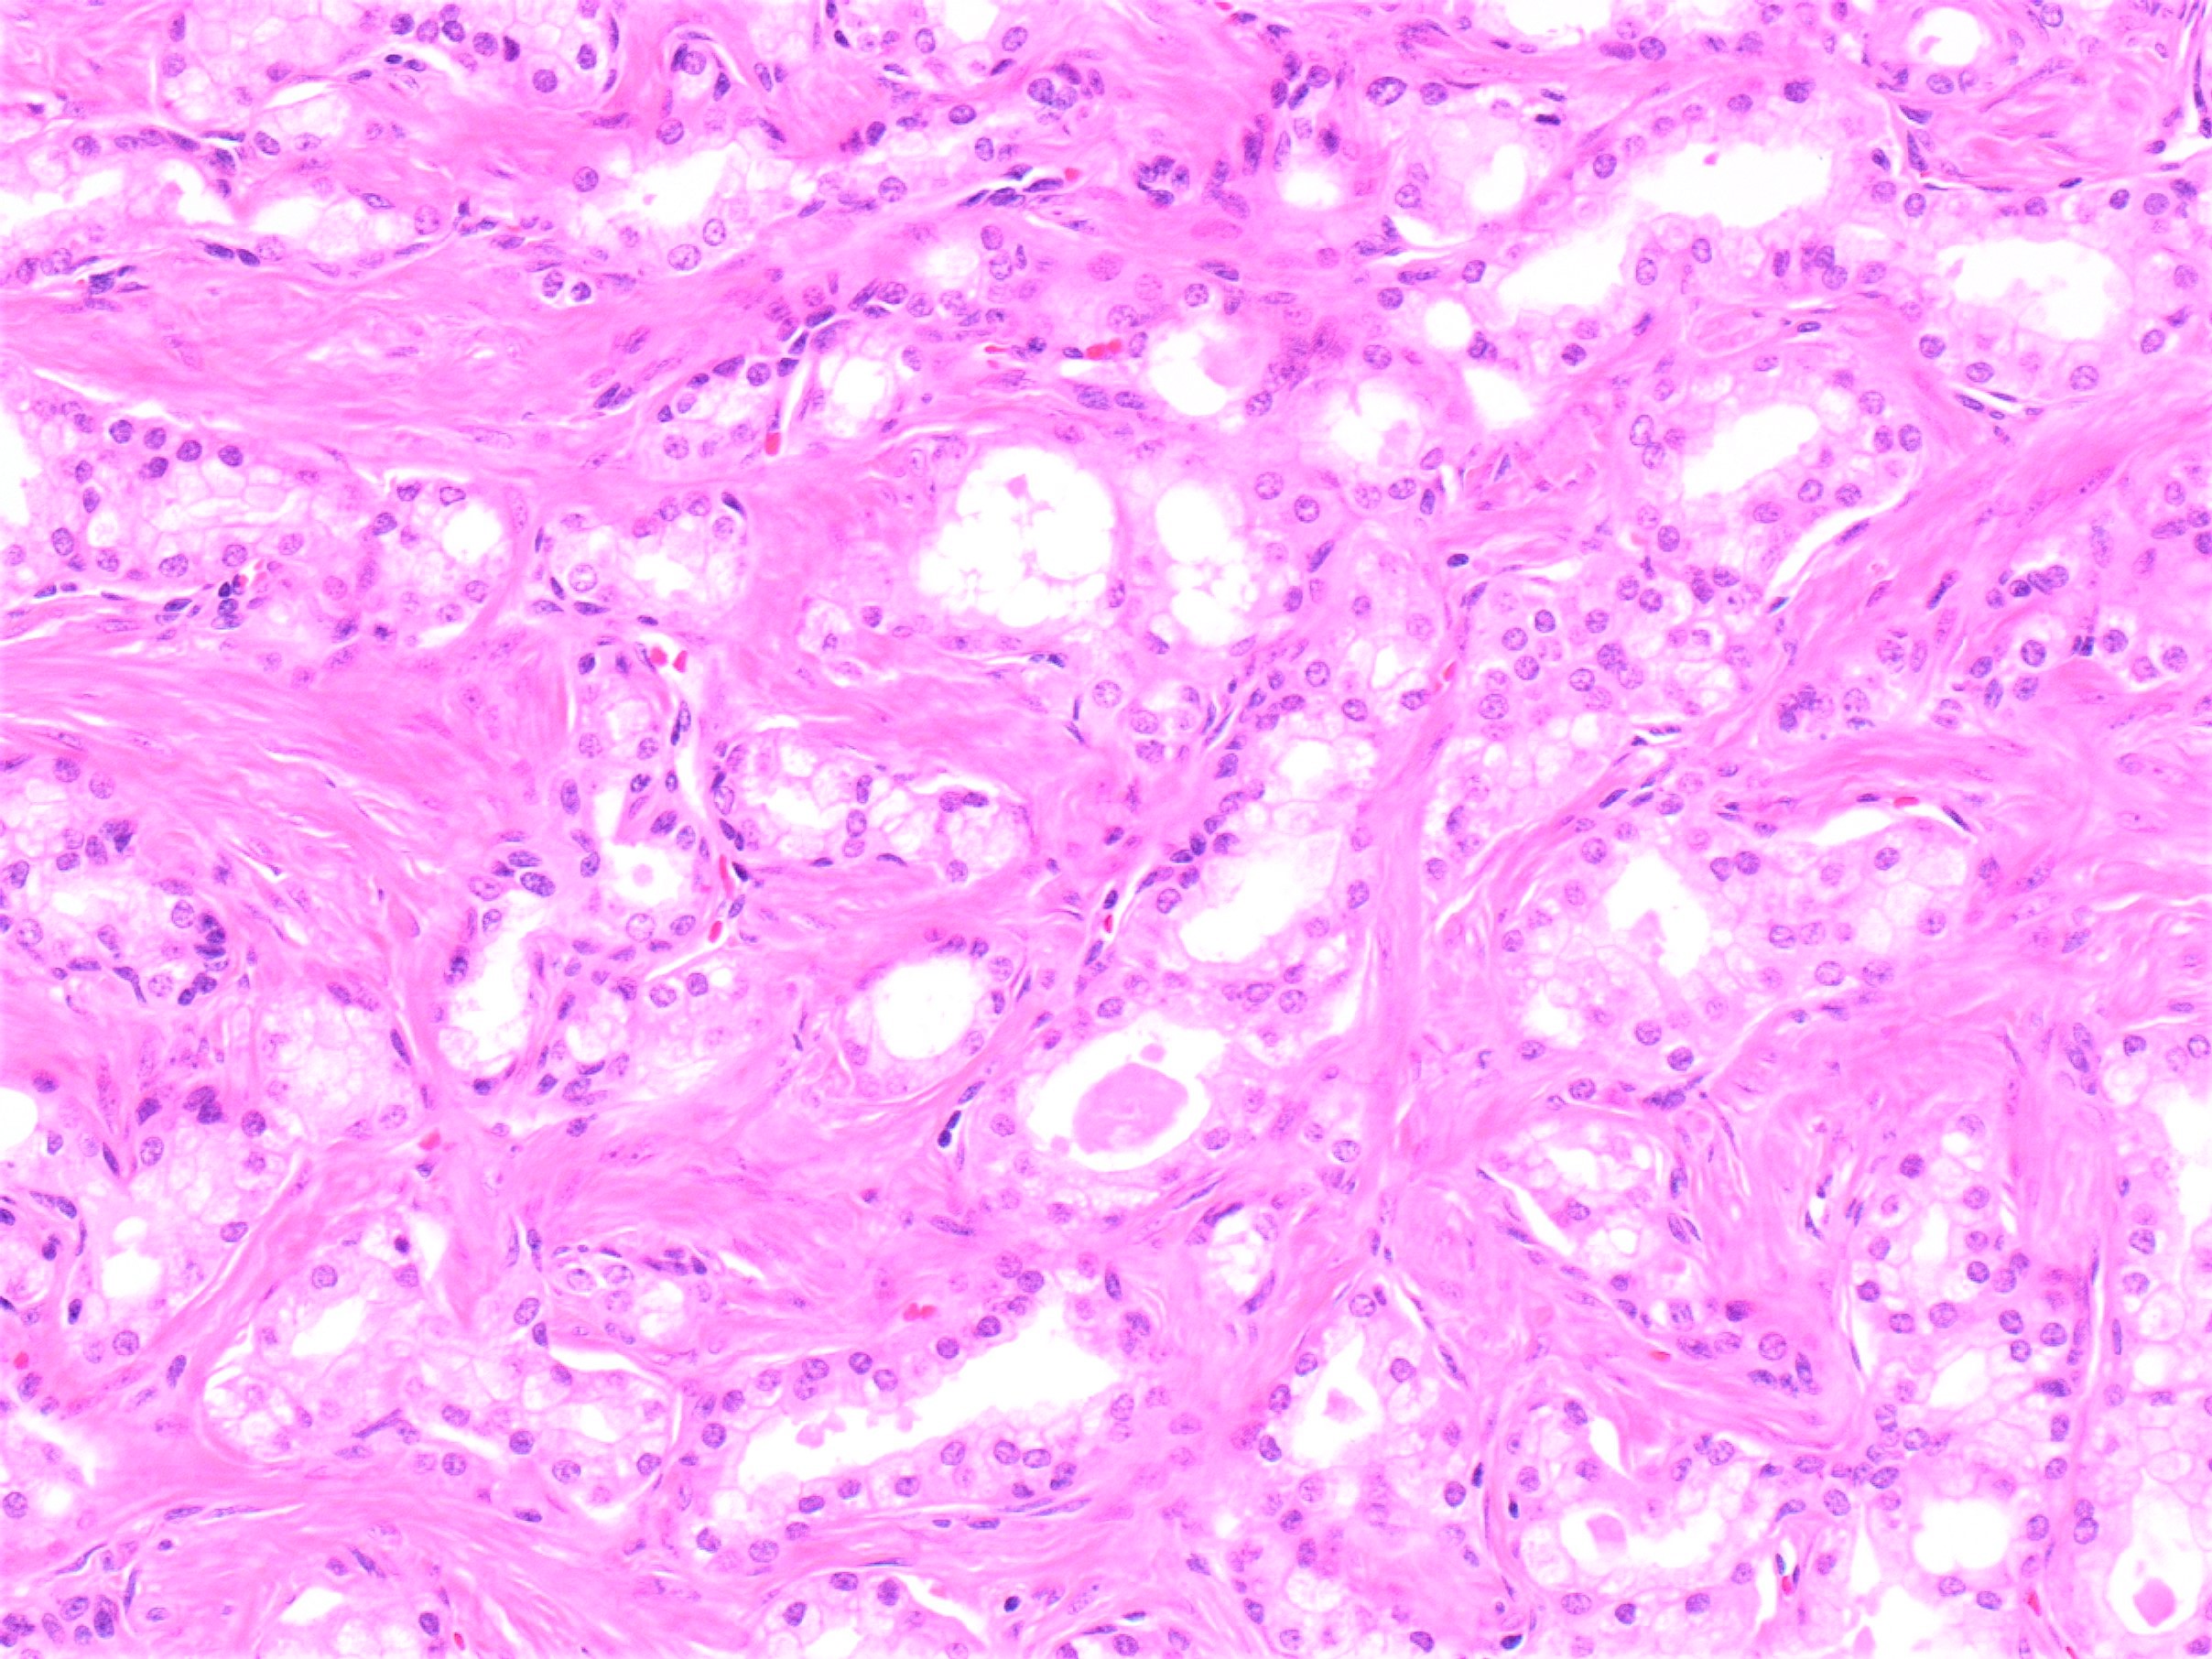 Papillary urothelial carcinoma of the bladder icd 10 - Papillary urothelial cancer icd 10